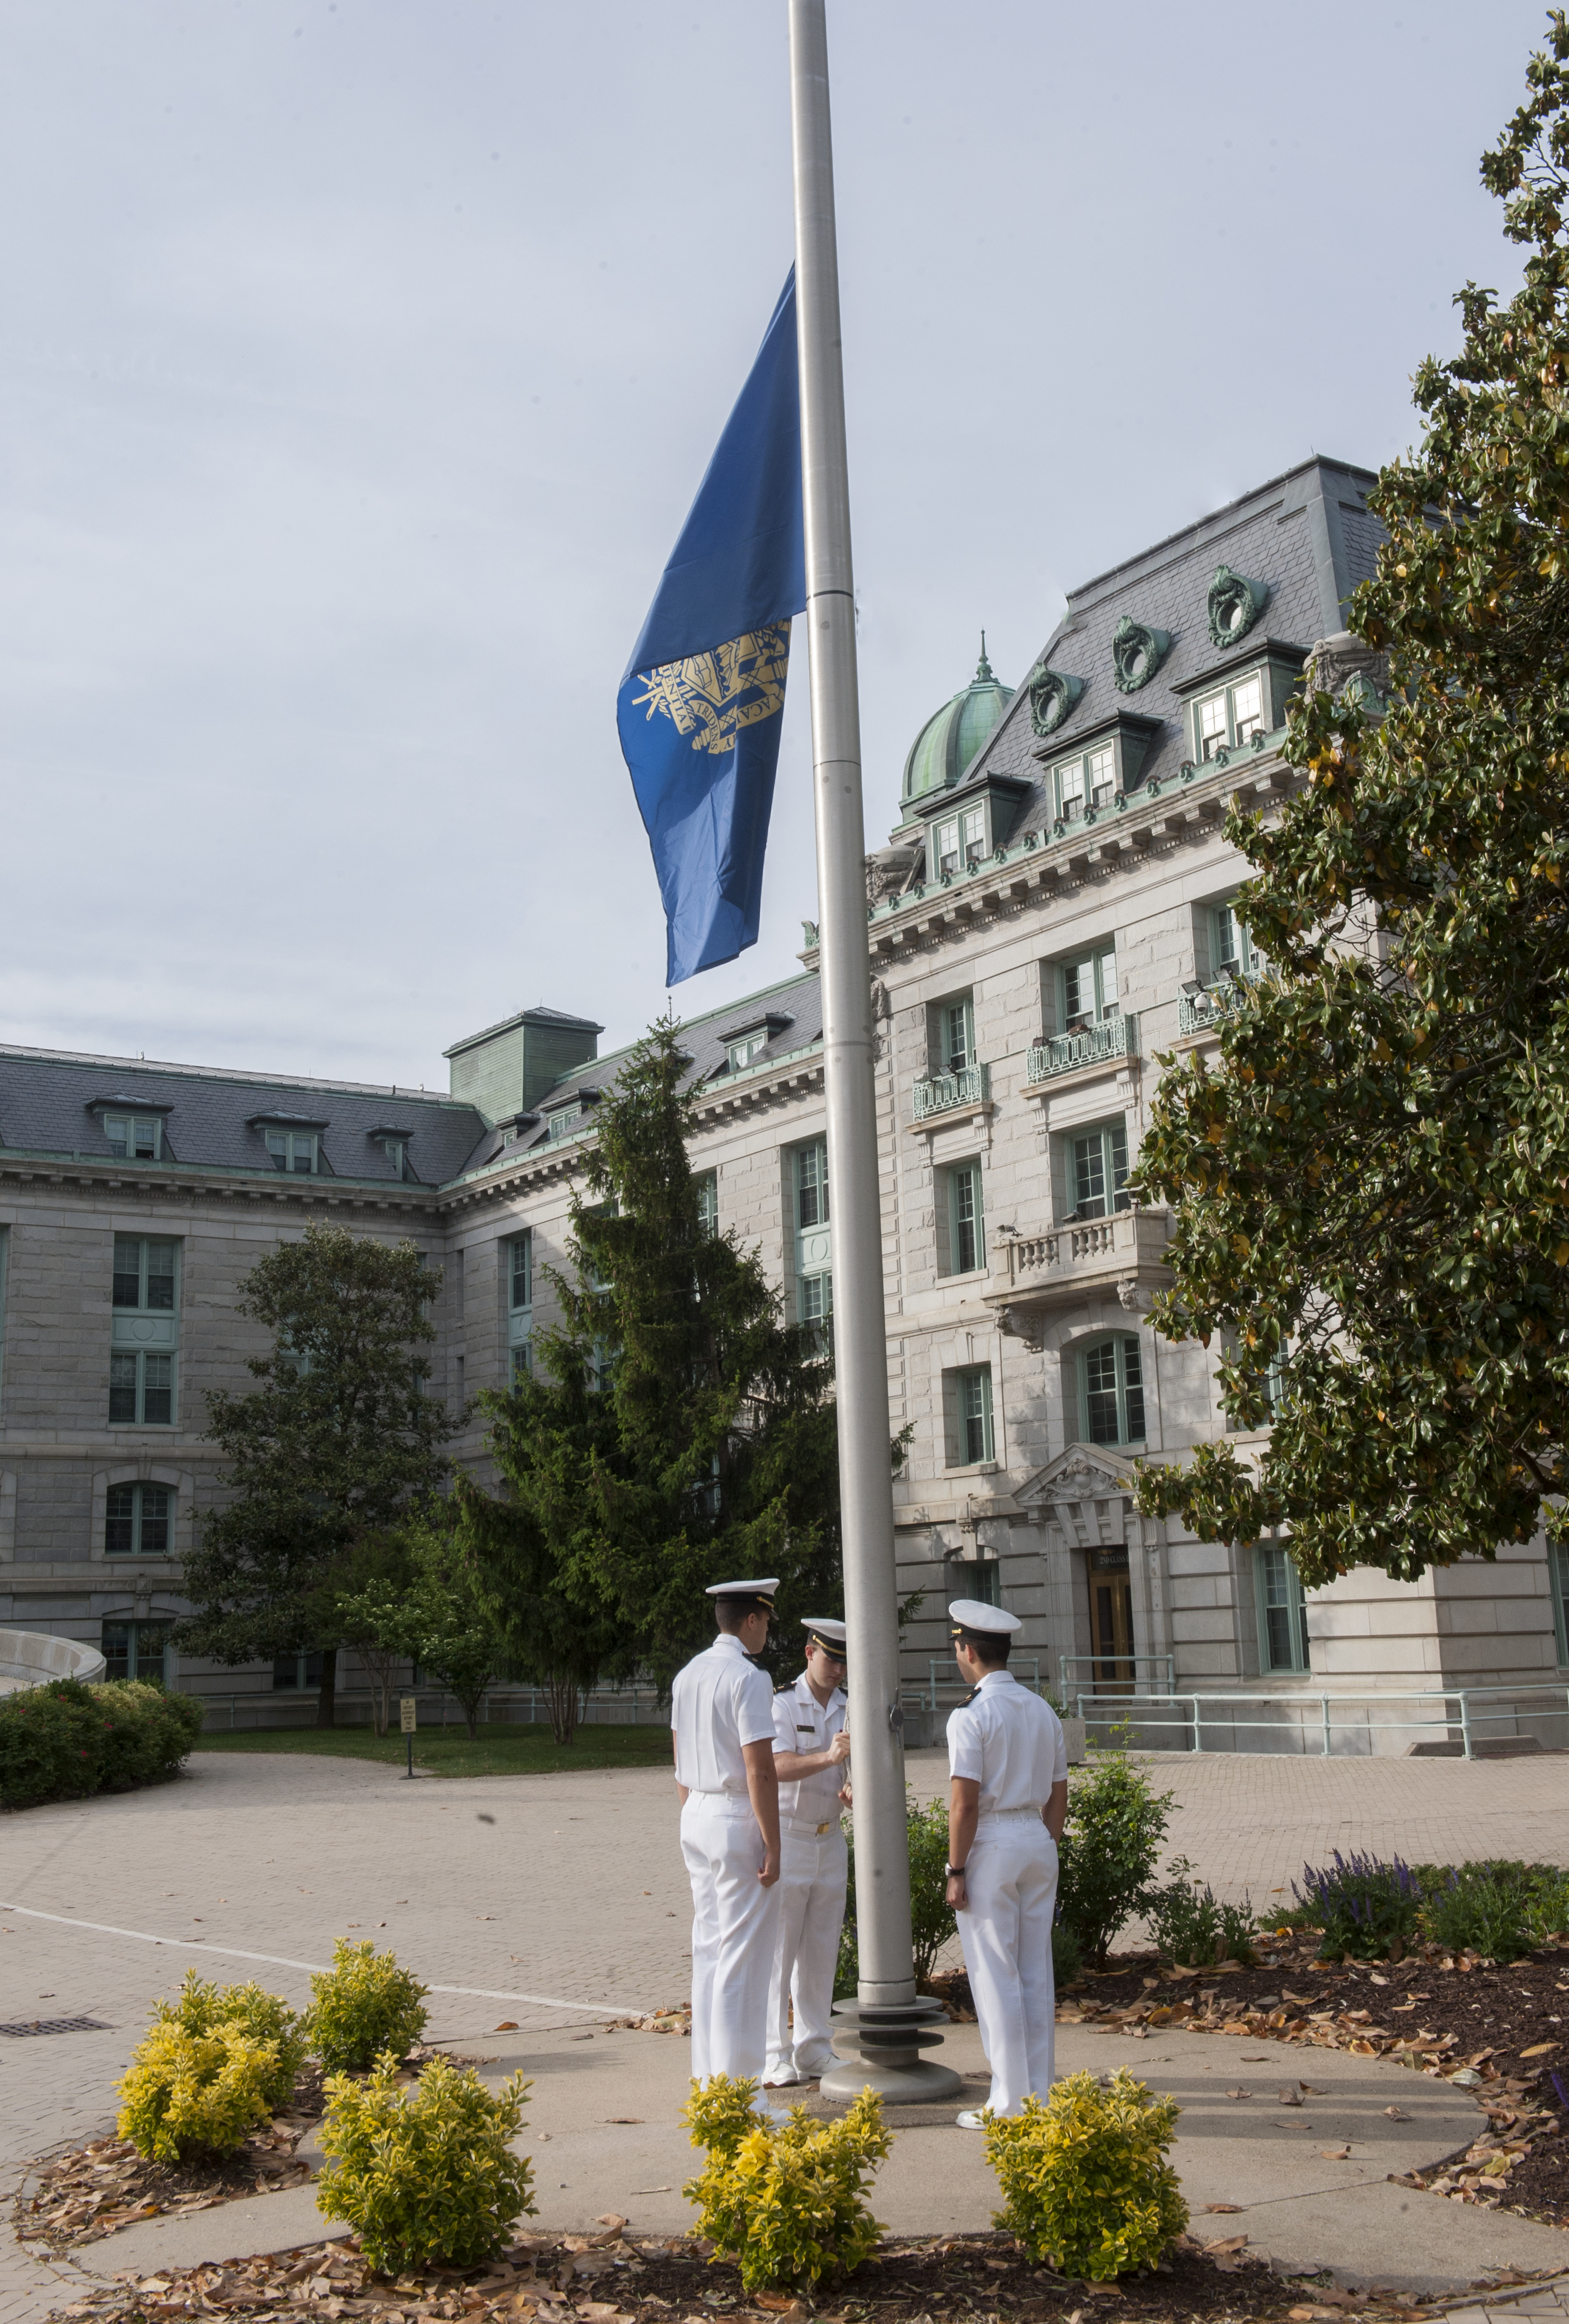 ANNAPOLIS, Md. (May 15, 2015) U.S. Naval Academy midshipman lower the Naval Academy flag to half-staff in remembrance of Midshipman Third Class Justin B. Zemser during morning colors at Tecumseh Court May 15. Zemser was one of the passengers who lost their life due to injuries sustained in the AMTRAK train crash in north Philadelphia May 12. (U.S. Navy photo by Mass Communication Specialist 3rd Class Nathan Wilkes /Released)